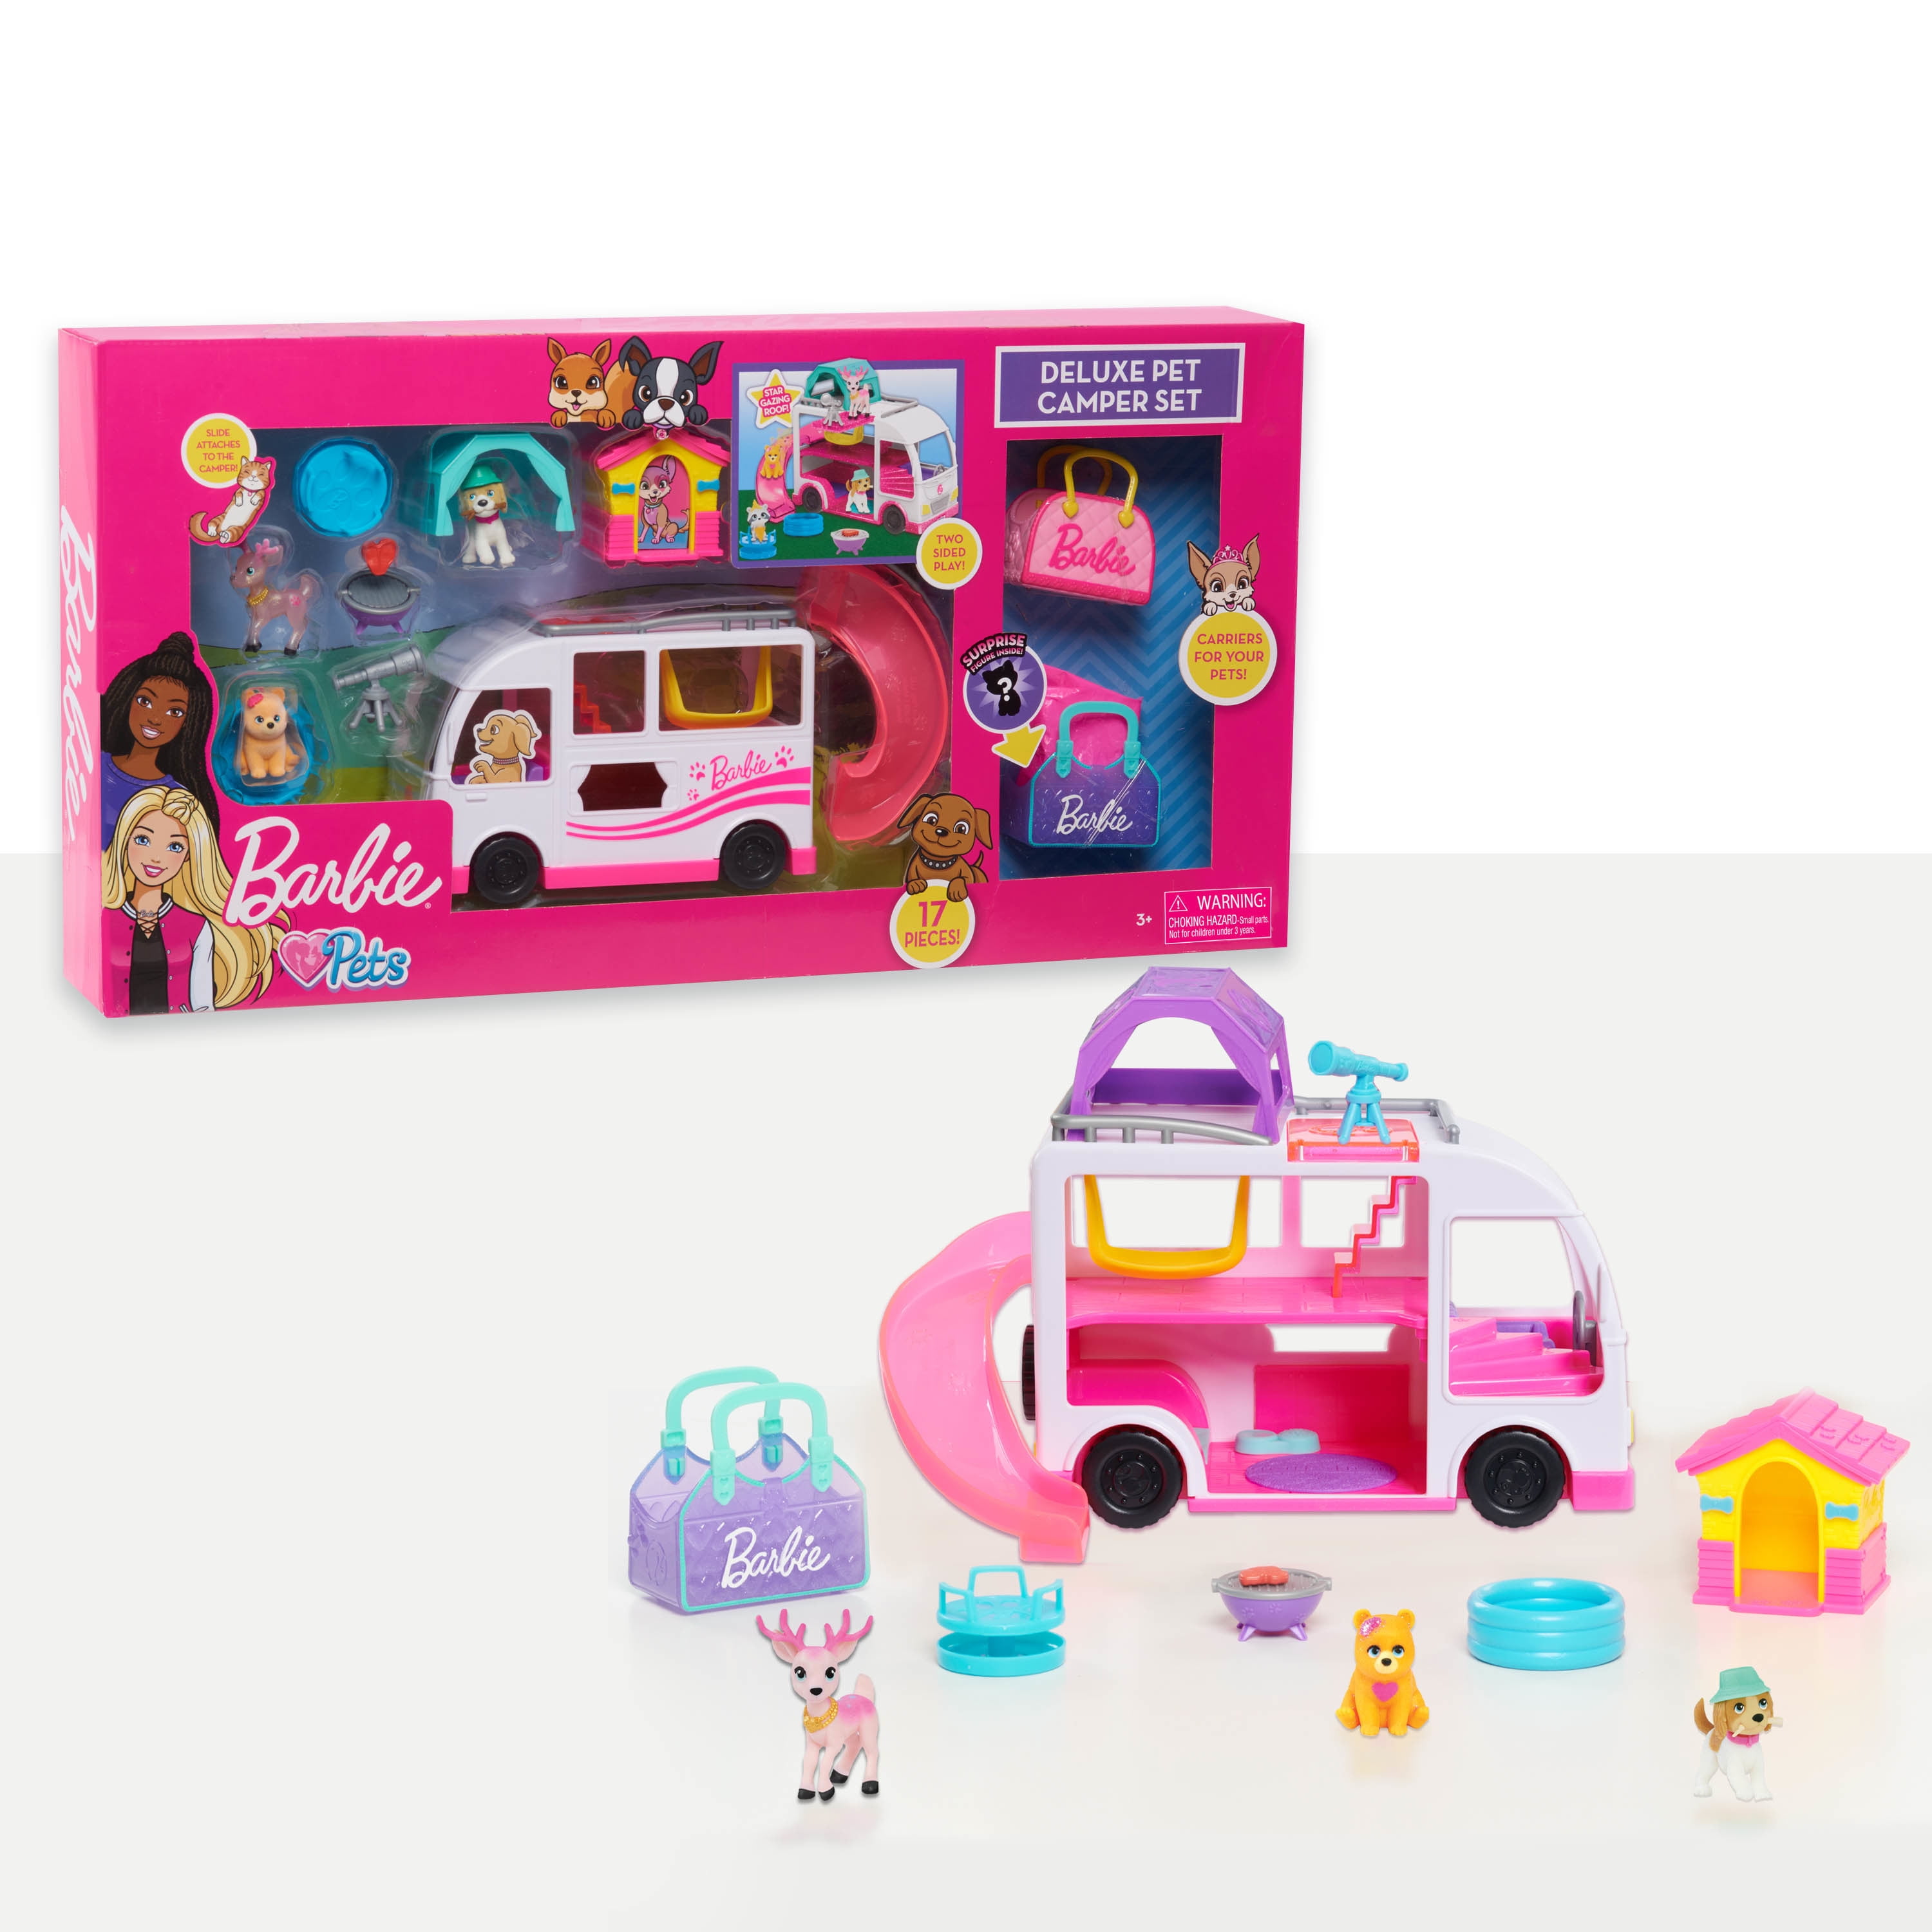 Barbie Deluxe Pet Camper Playset 17-pieces, Kids Toys for Ages 3 Up, Gifts and Presents - Walmart.com